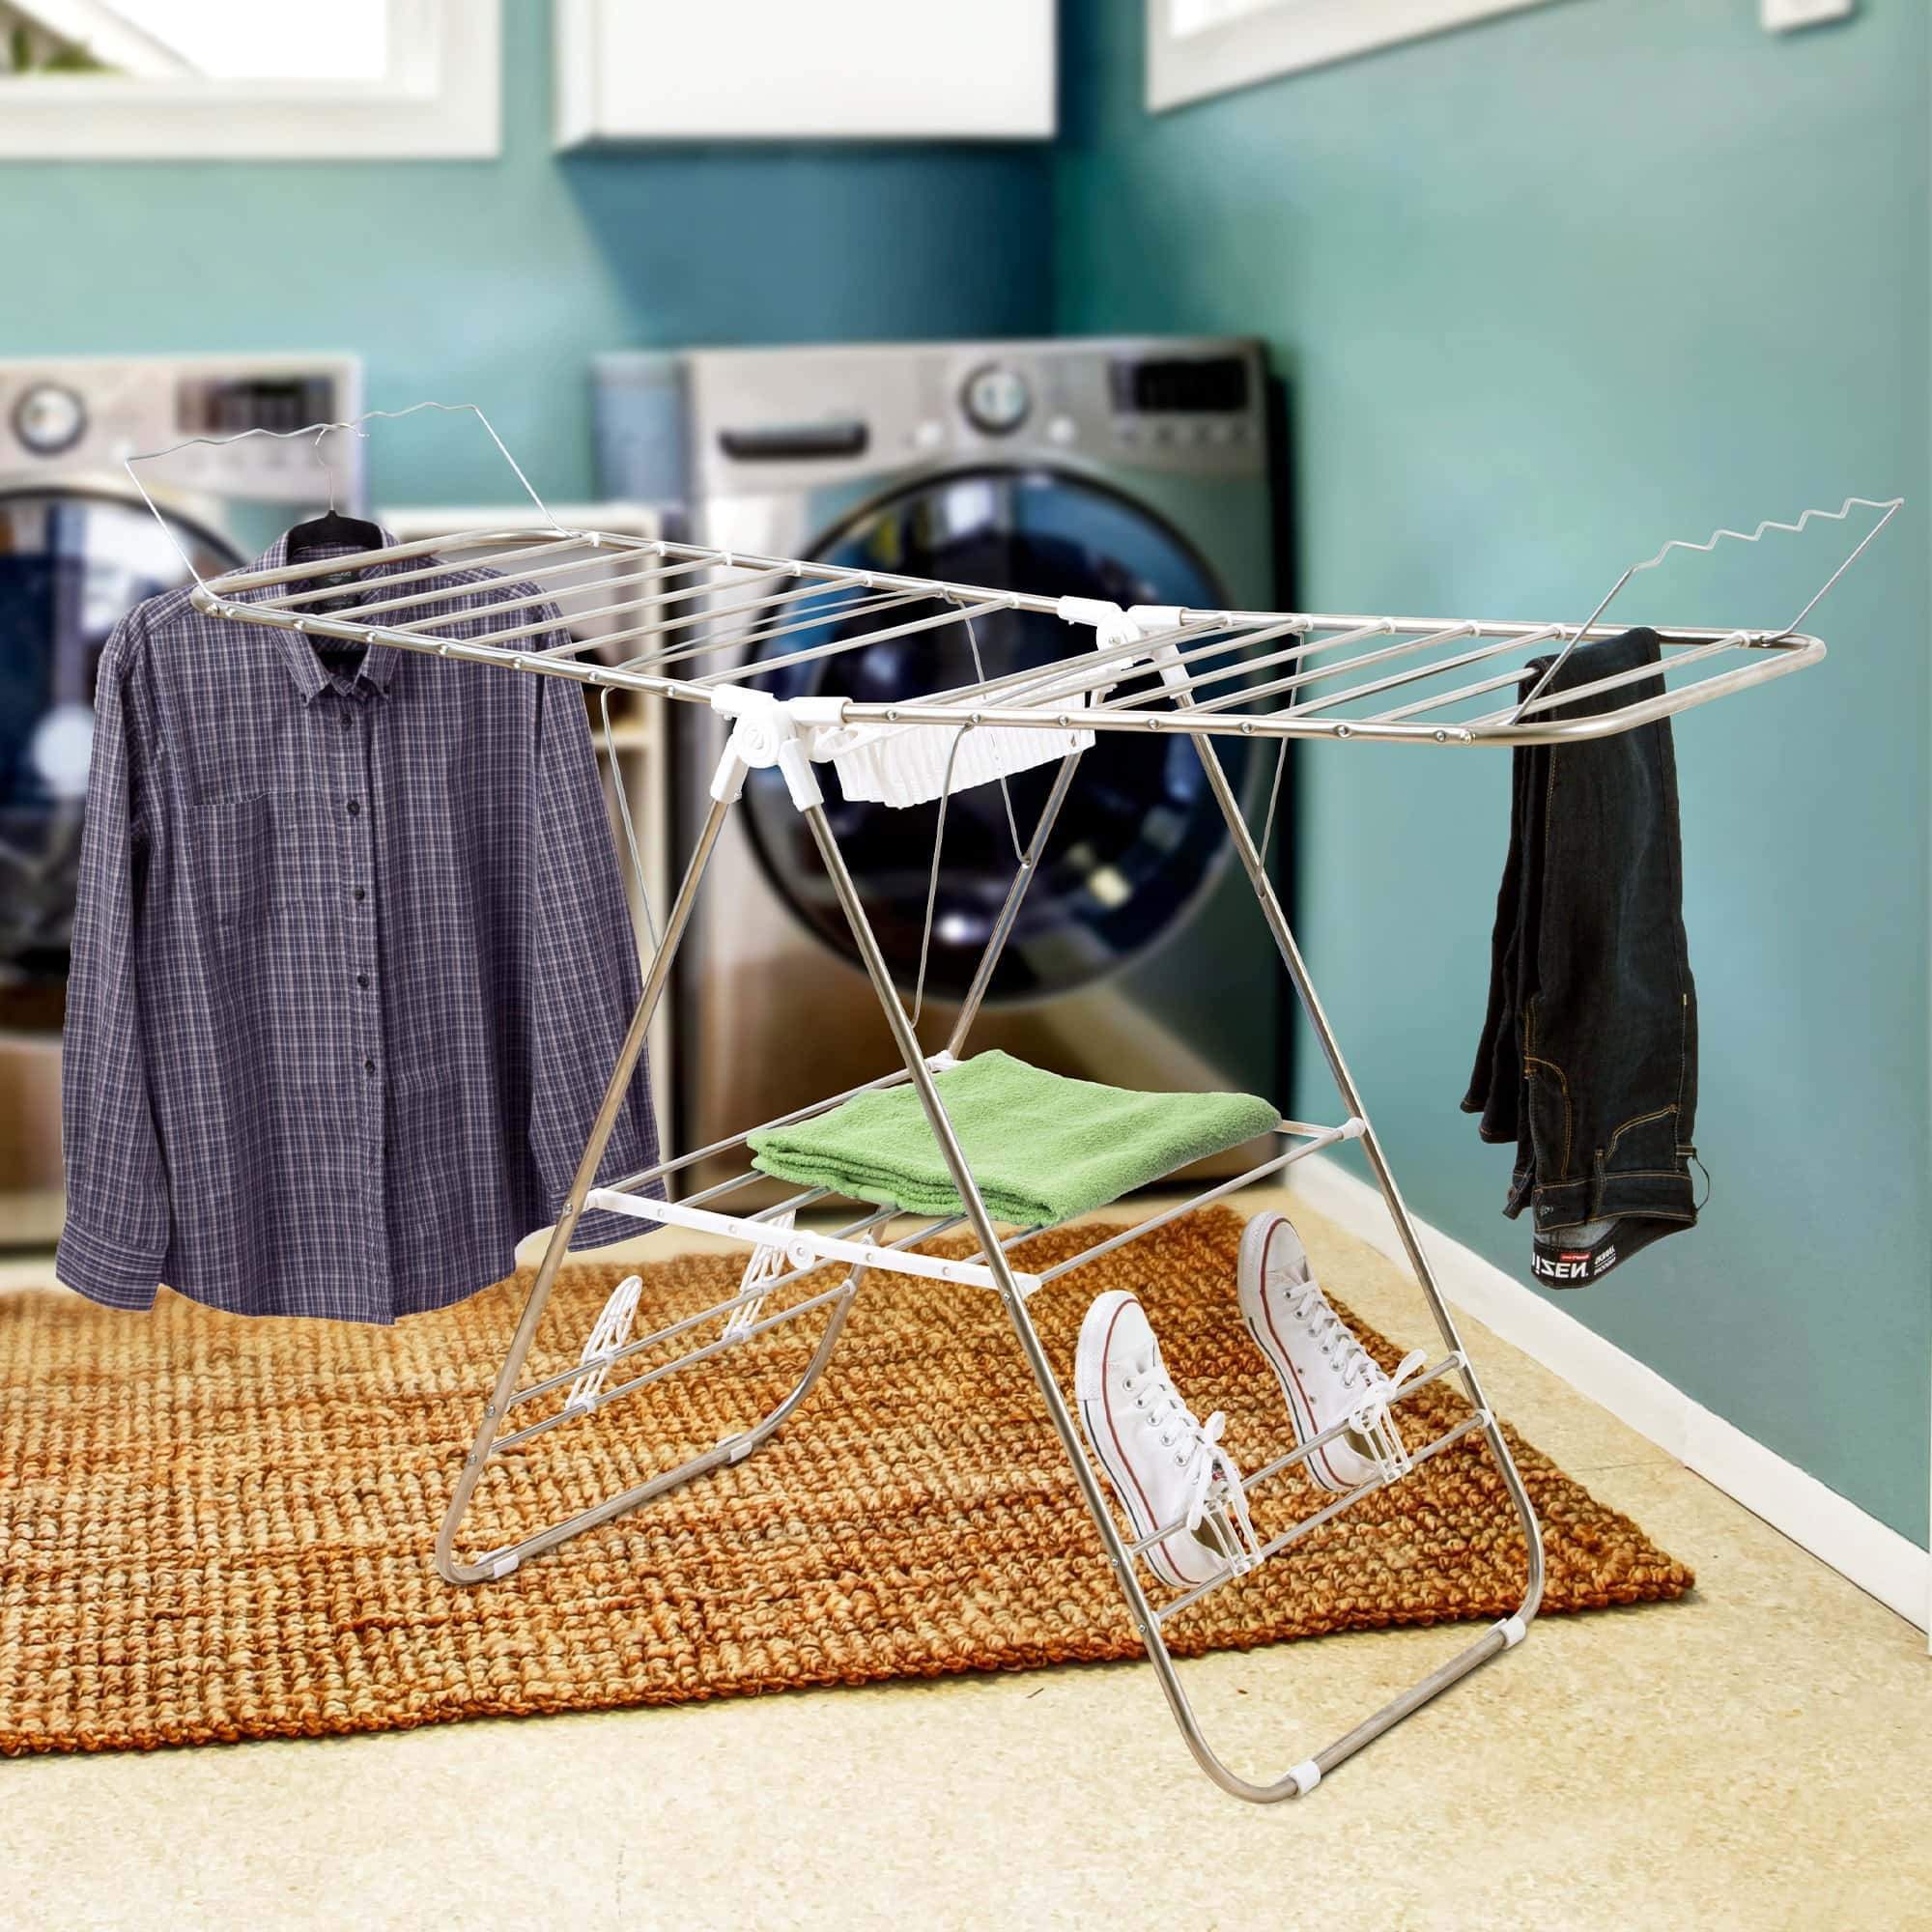 Heavy Duty Laundry Drying Rack- Chrome Steel Clothing Shelf for Indoor and Outdoor Use Best Used for Shirts Pants Towels Shoes by Everyday Home